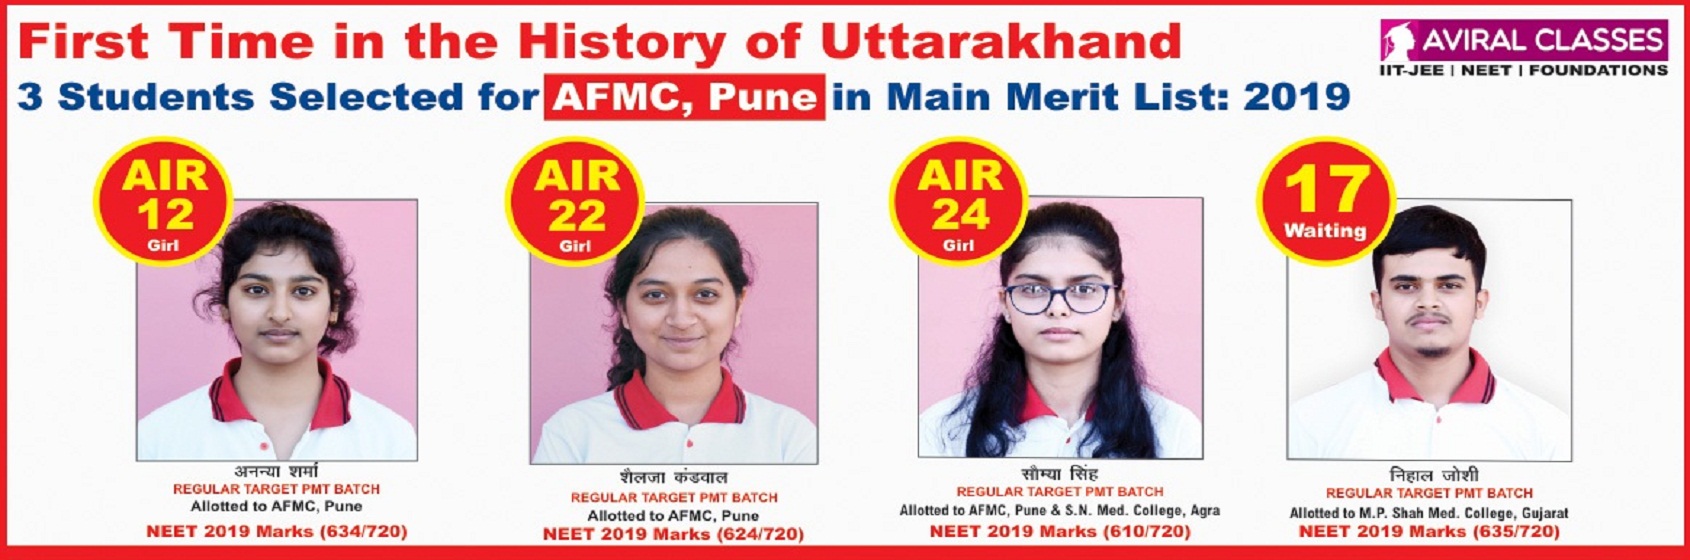 AFMC Result of Aviral Classes